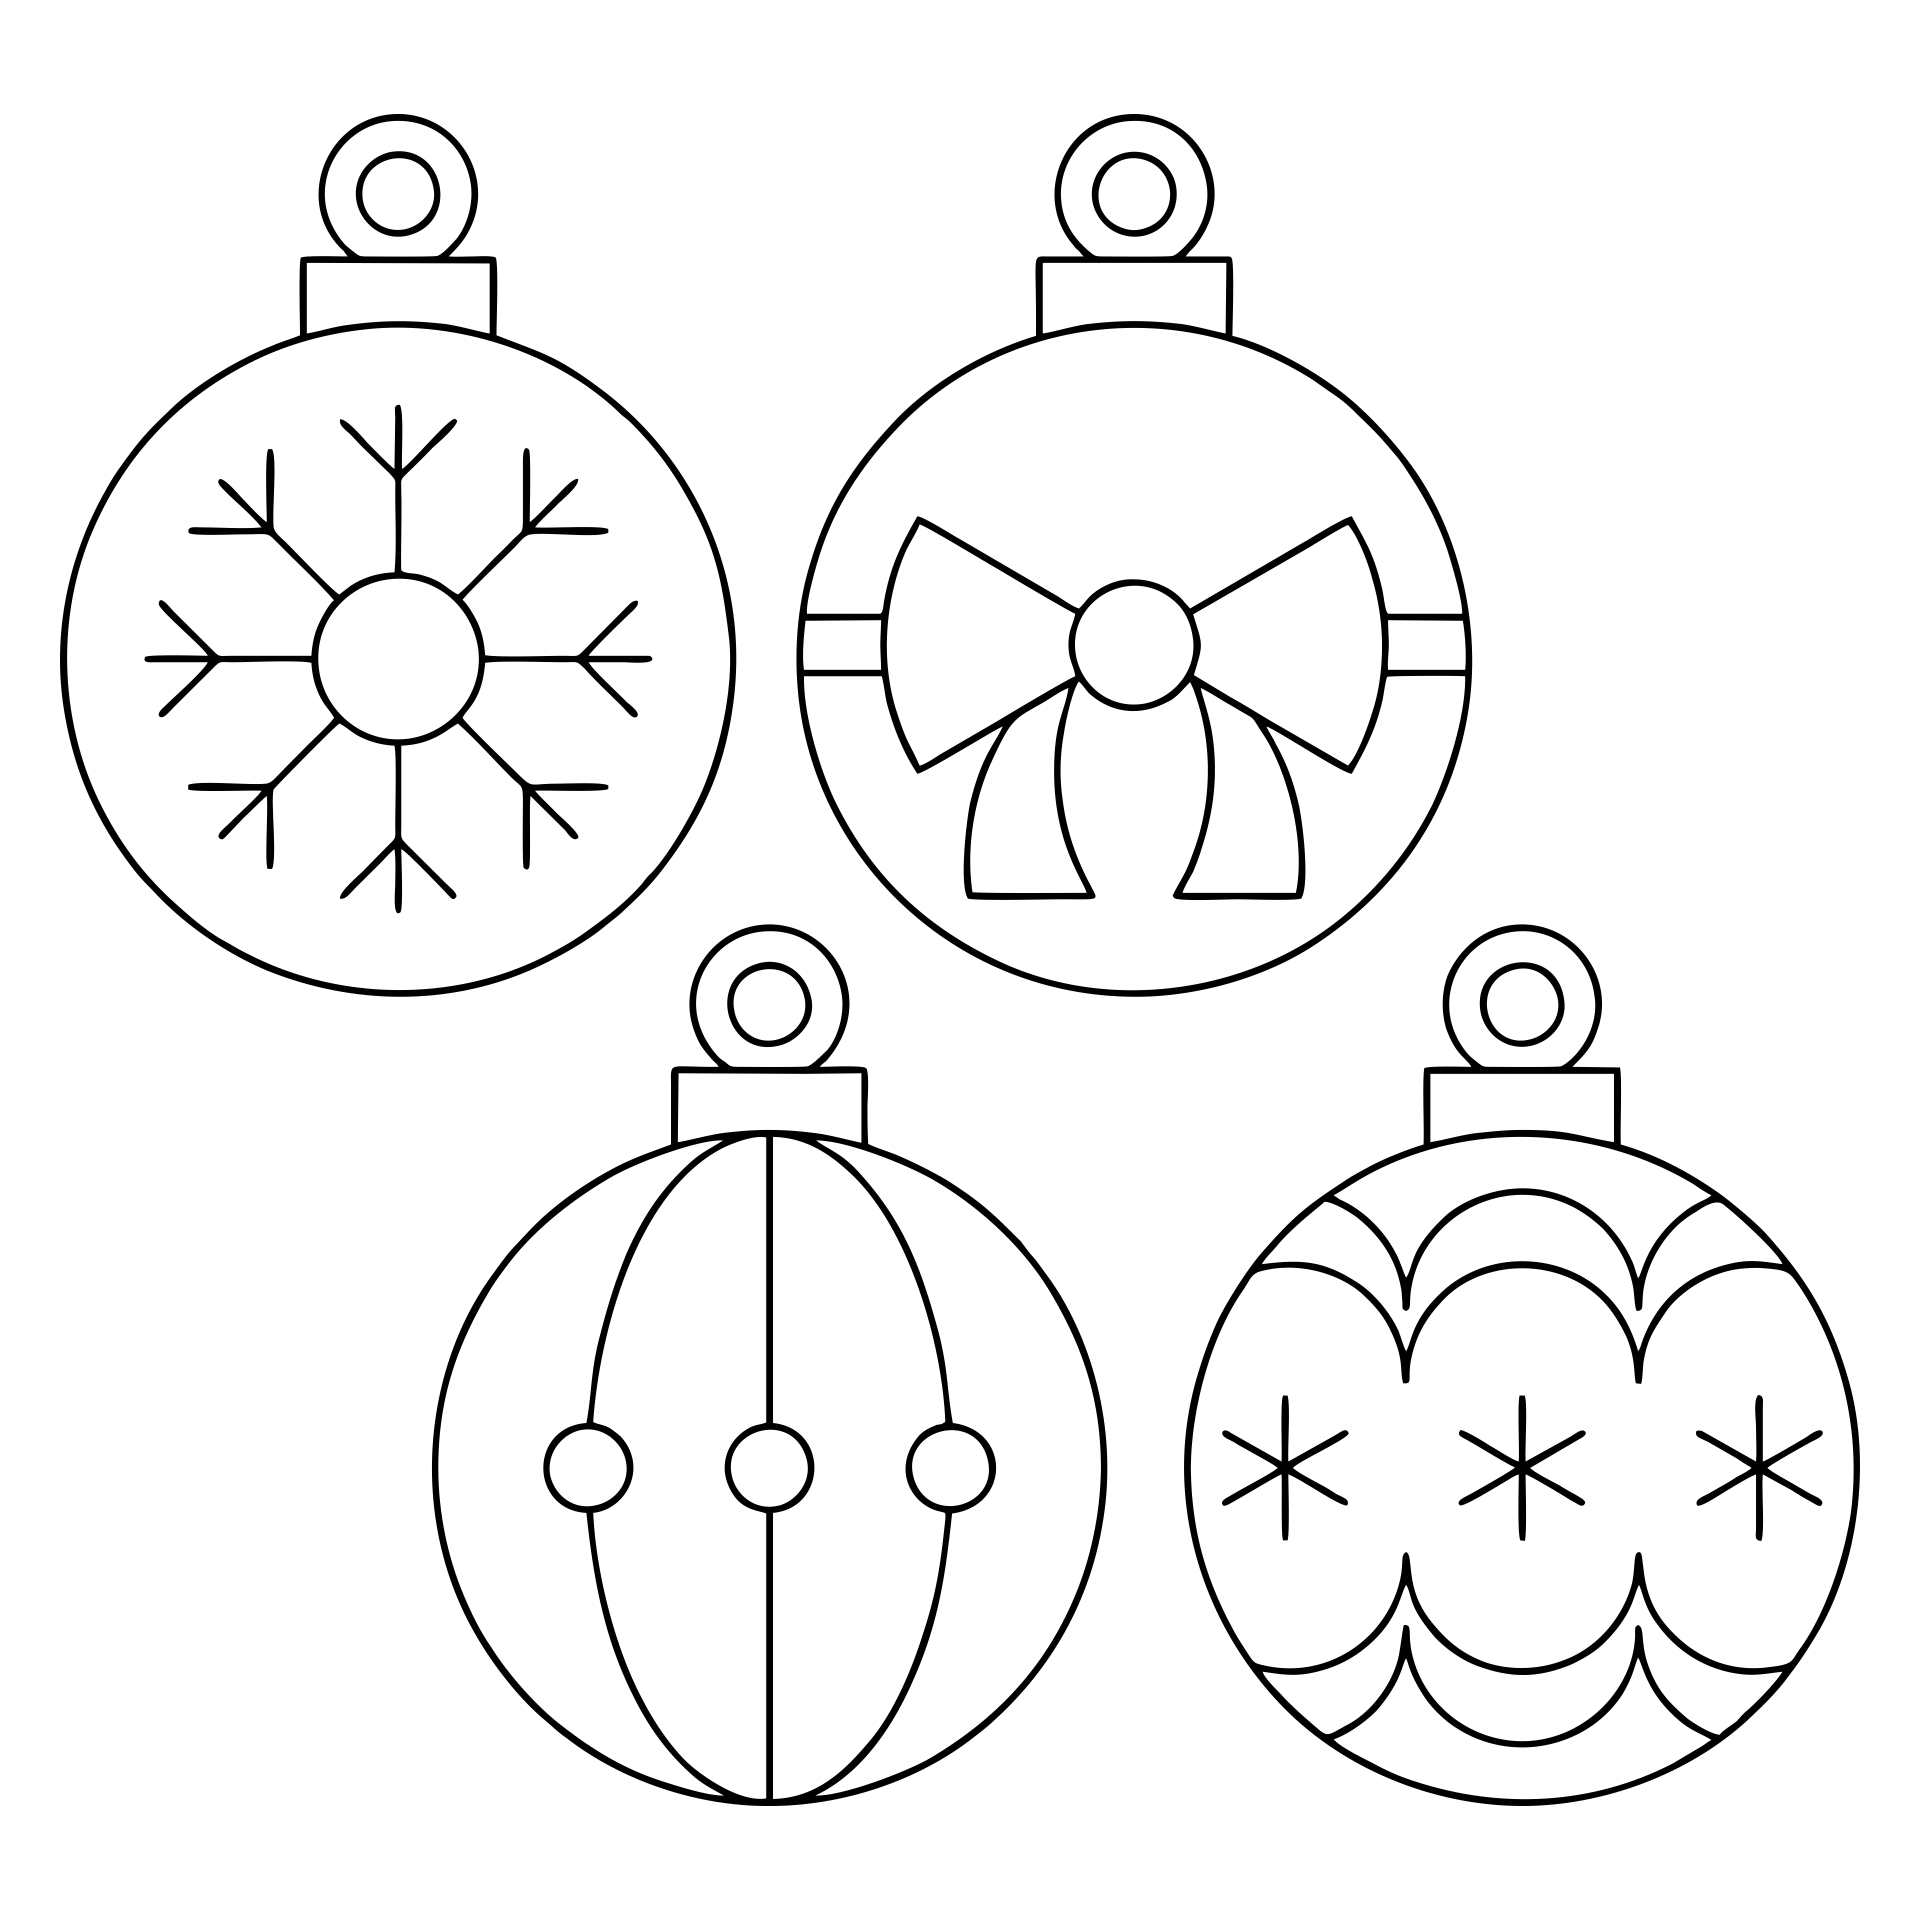 7 Best Images of Printable Christmas Ornament Templates Christmas